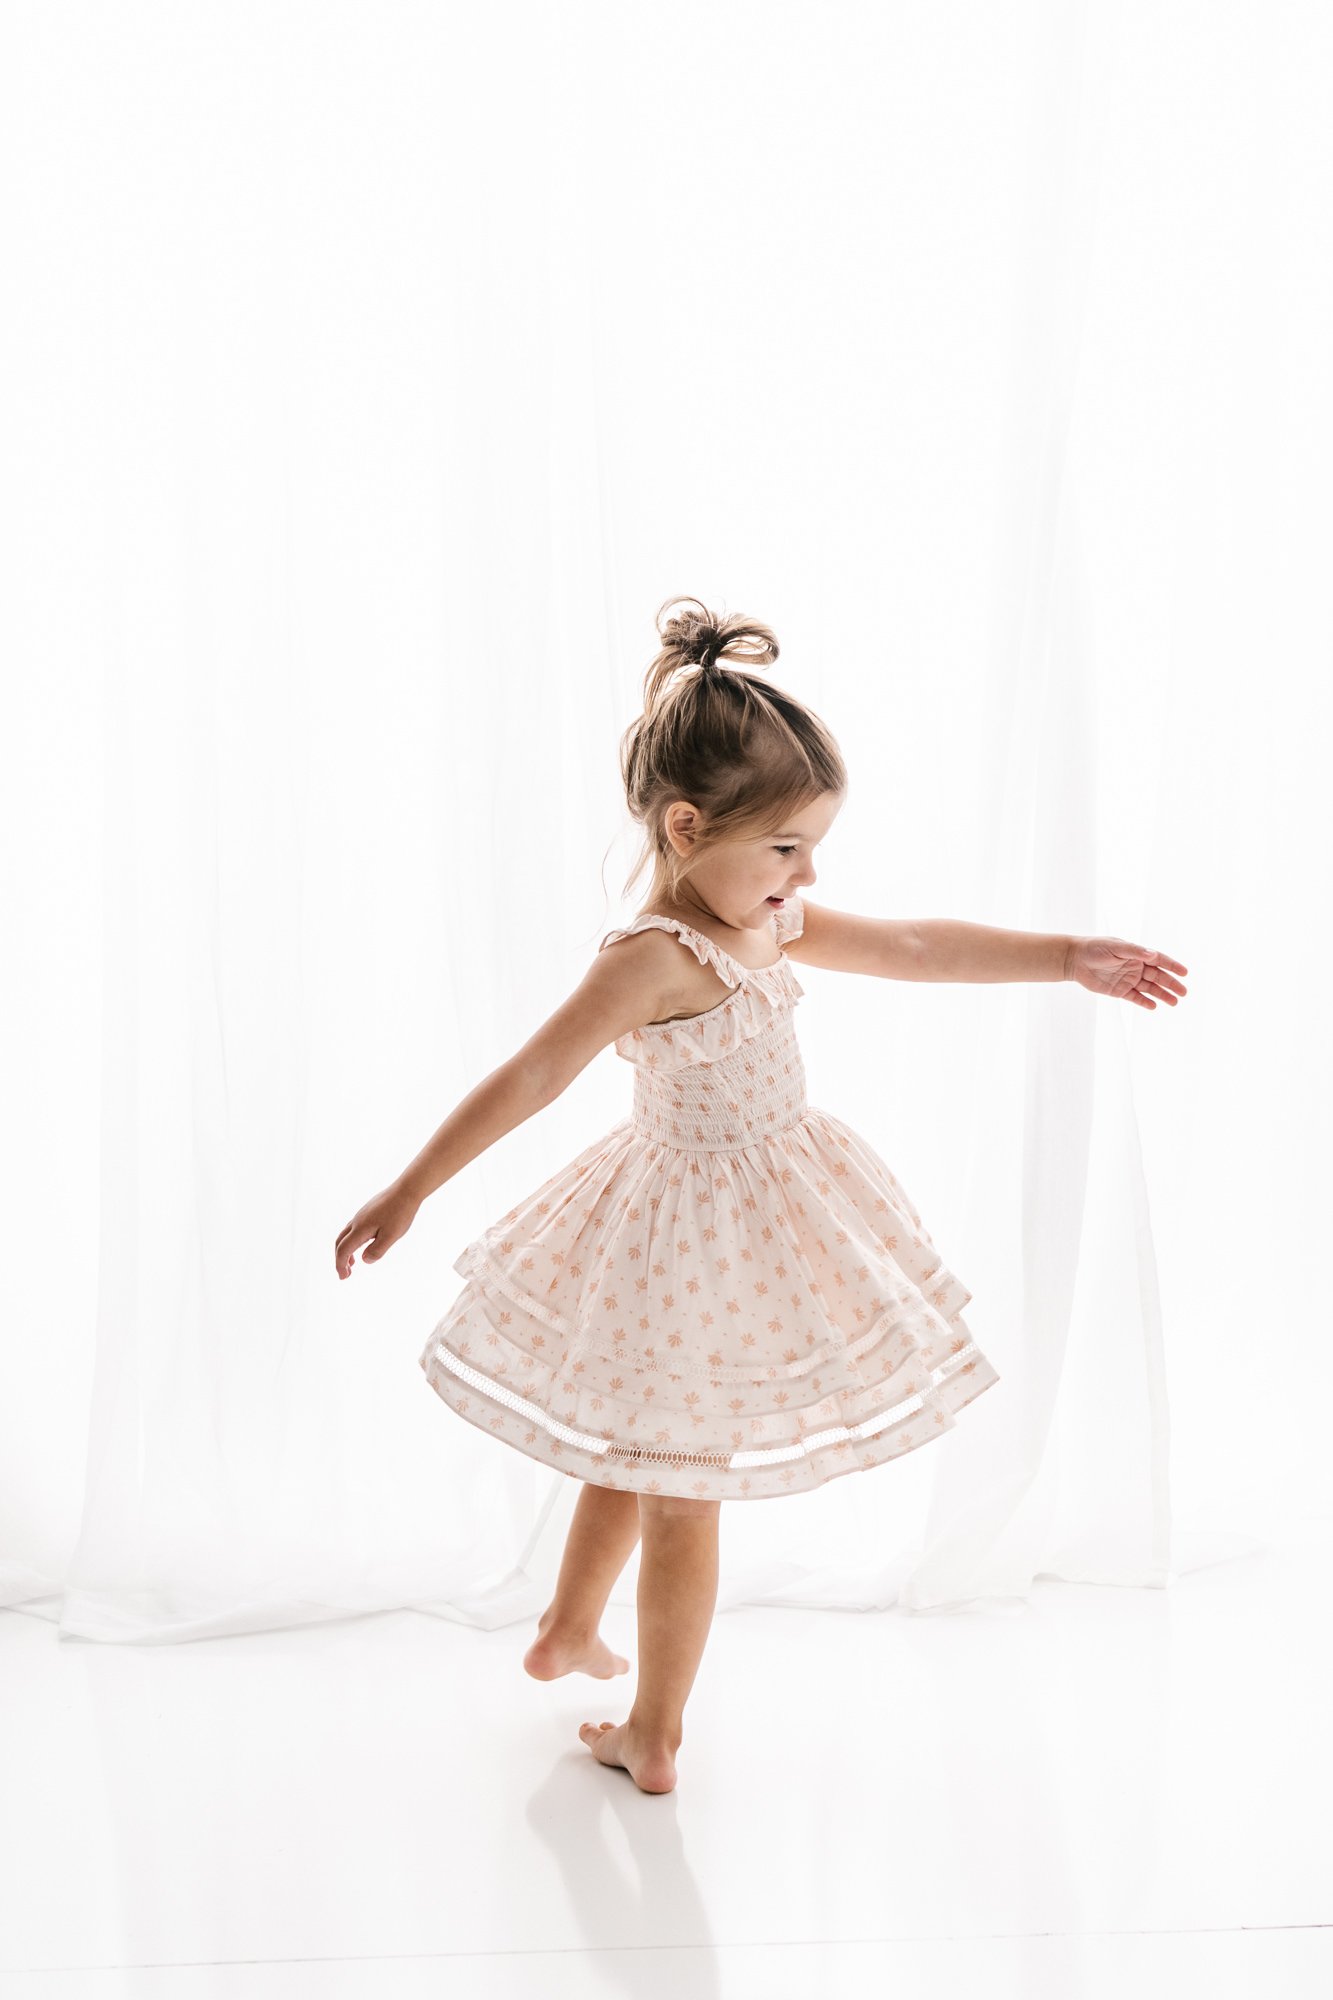  Nicole Hawkins Photography captures a little girl dancing around a white studio with a darling top knot bun. floral twirl dress dancing darling girl white studio family portraits #NicoleHawkinsPhotography #NicoleHawkinsMaternity #MaternityStudioPort